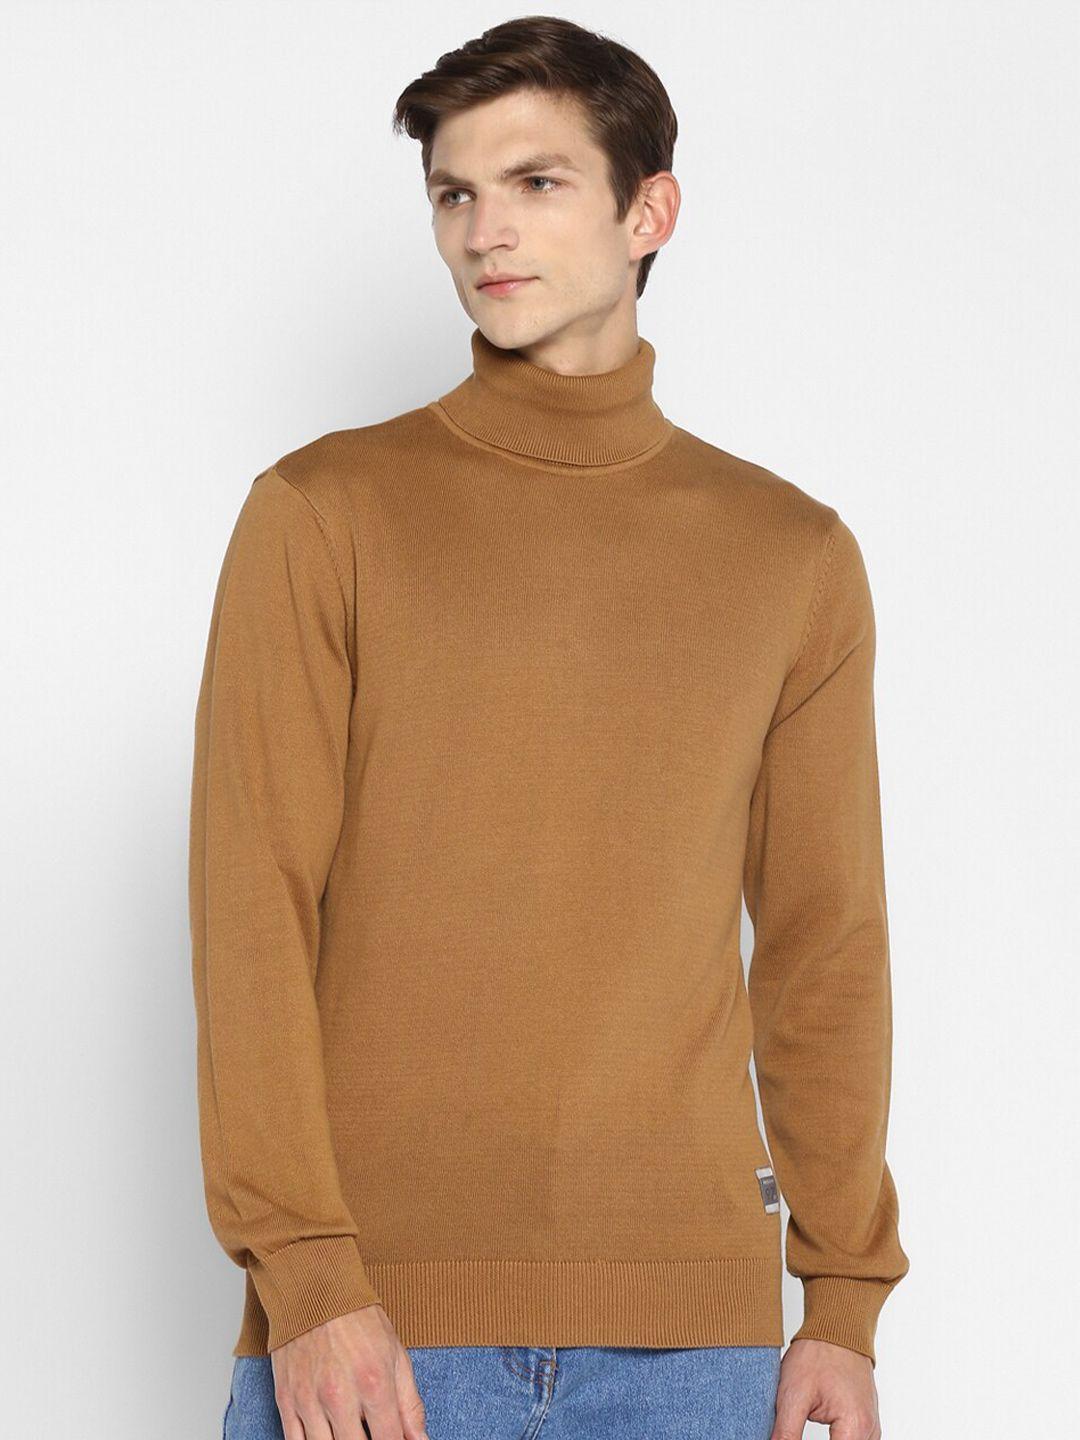 red-chief-turtle-neck-organic-cotton-pullover-sweater